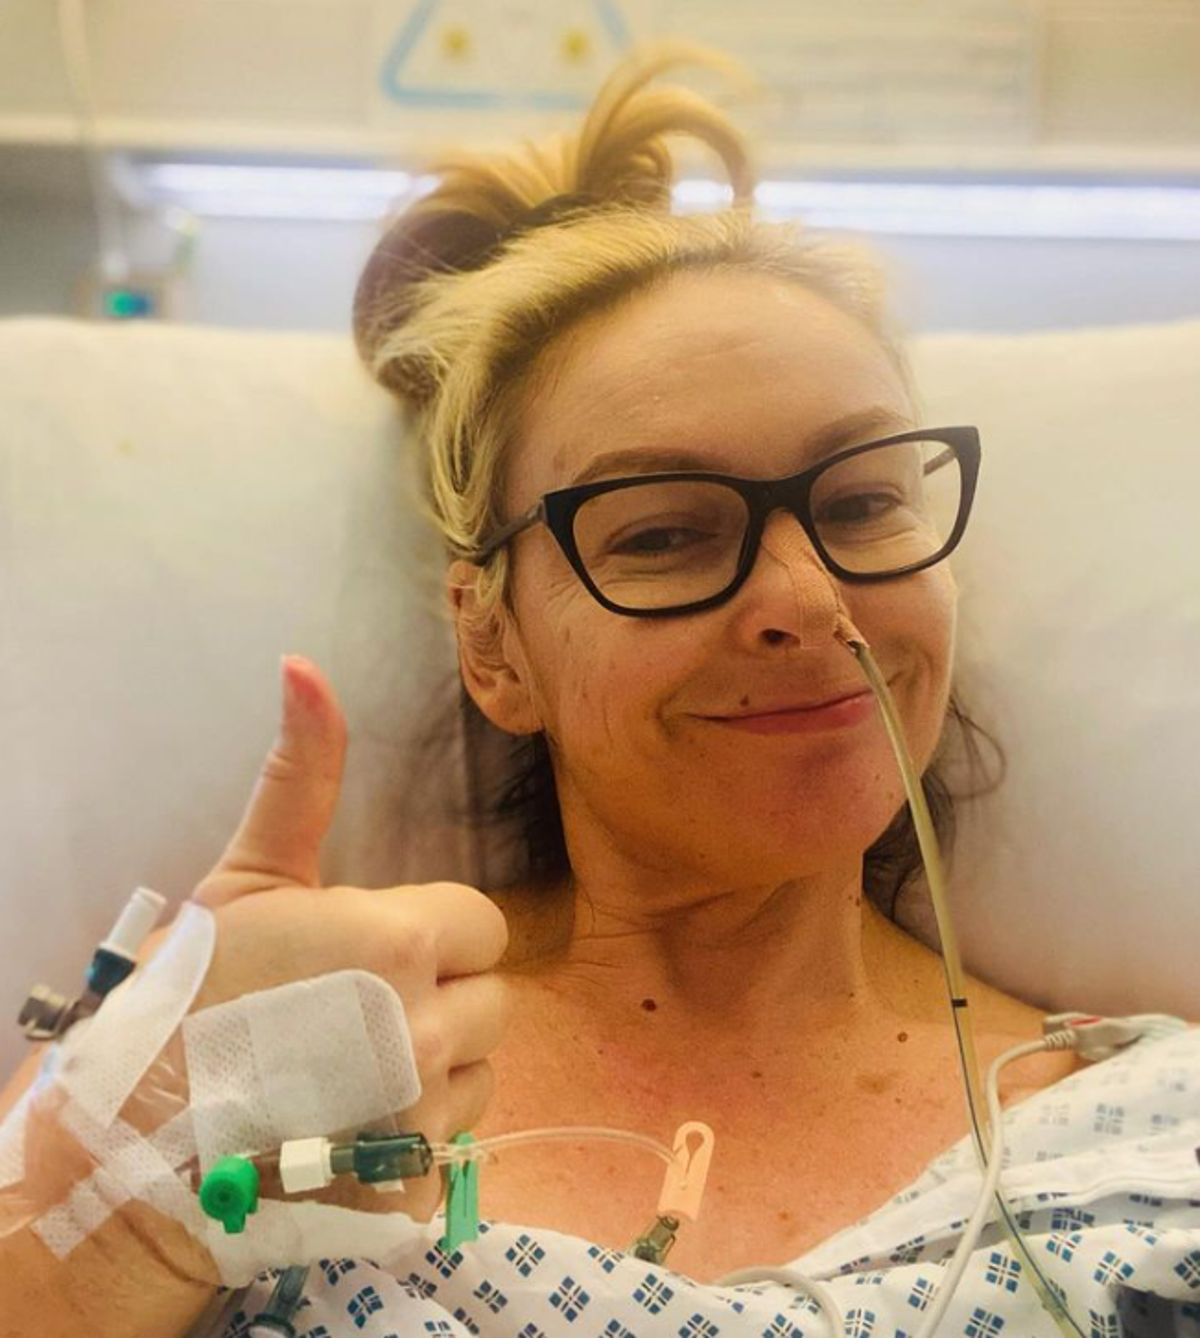 Married at First Sight star Mel Schilling shares health update amid cancer battle [Video]